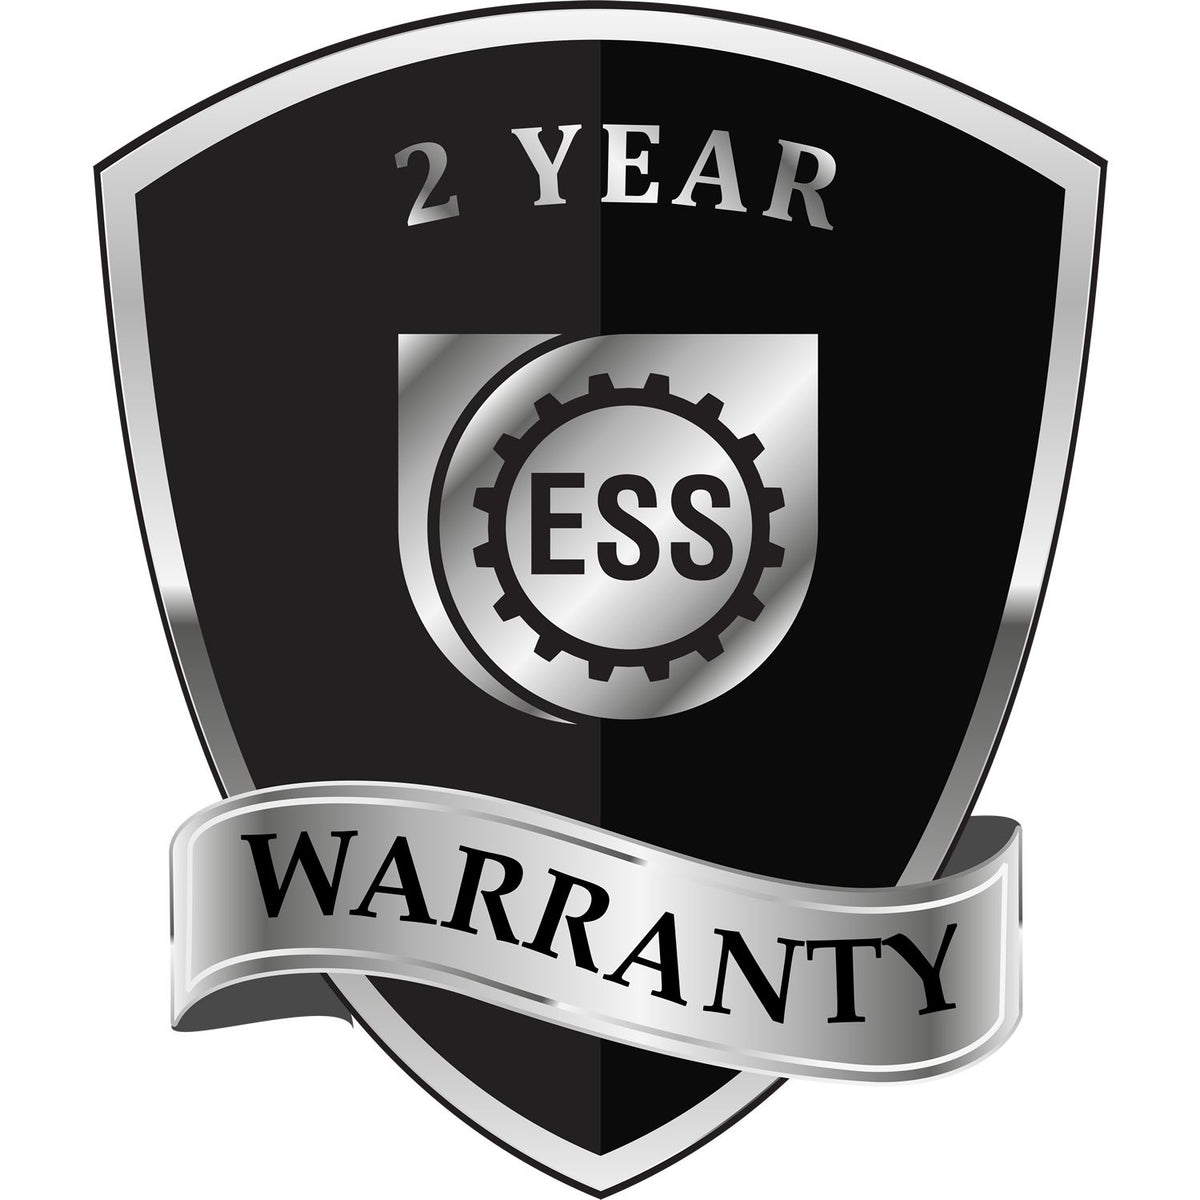 A black and silver badge or emblem showing warranty information for the State of Michigan Extended Long Reach Geologist Seal